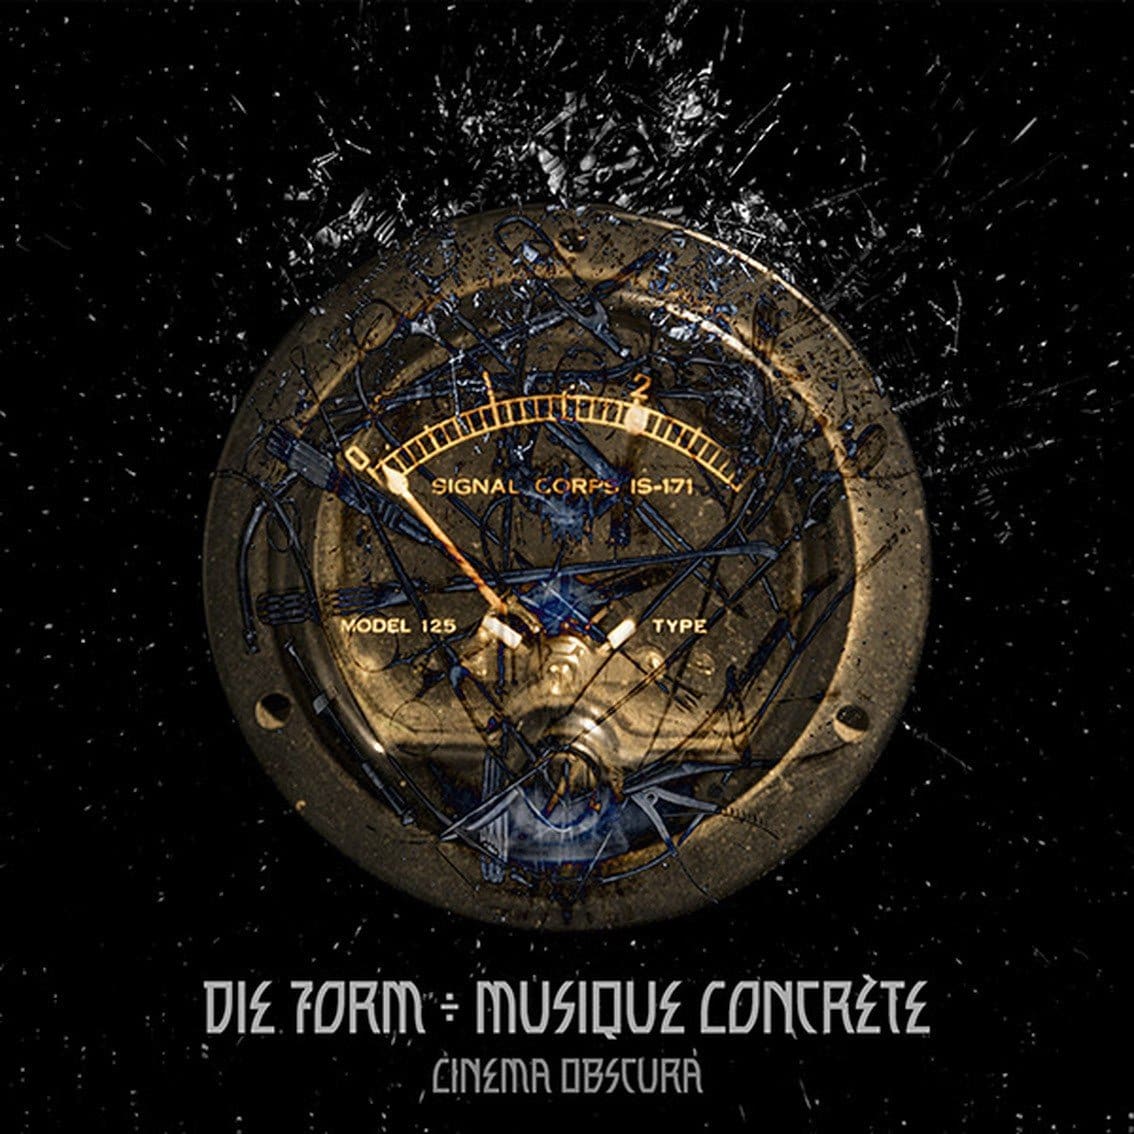 Die Form reactive own Bain Total label and prepare first release